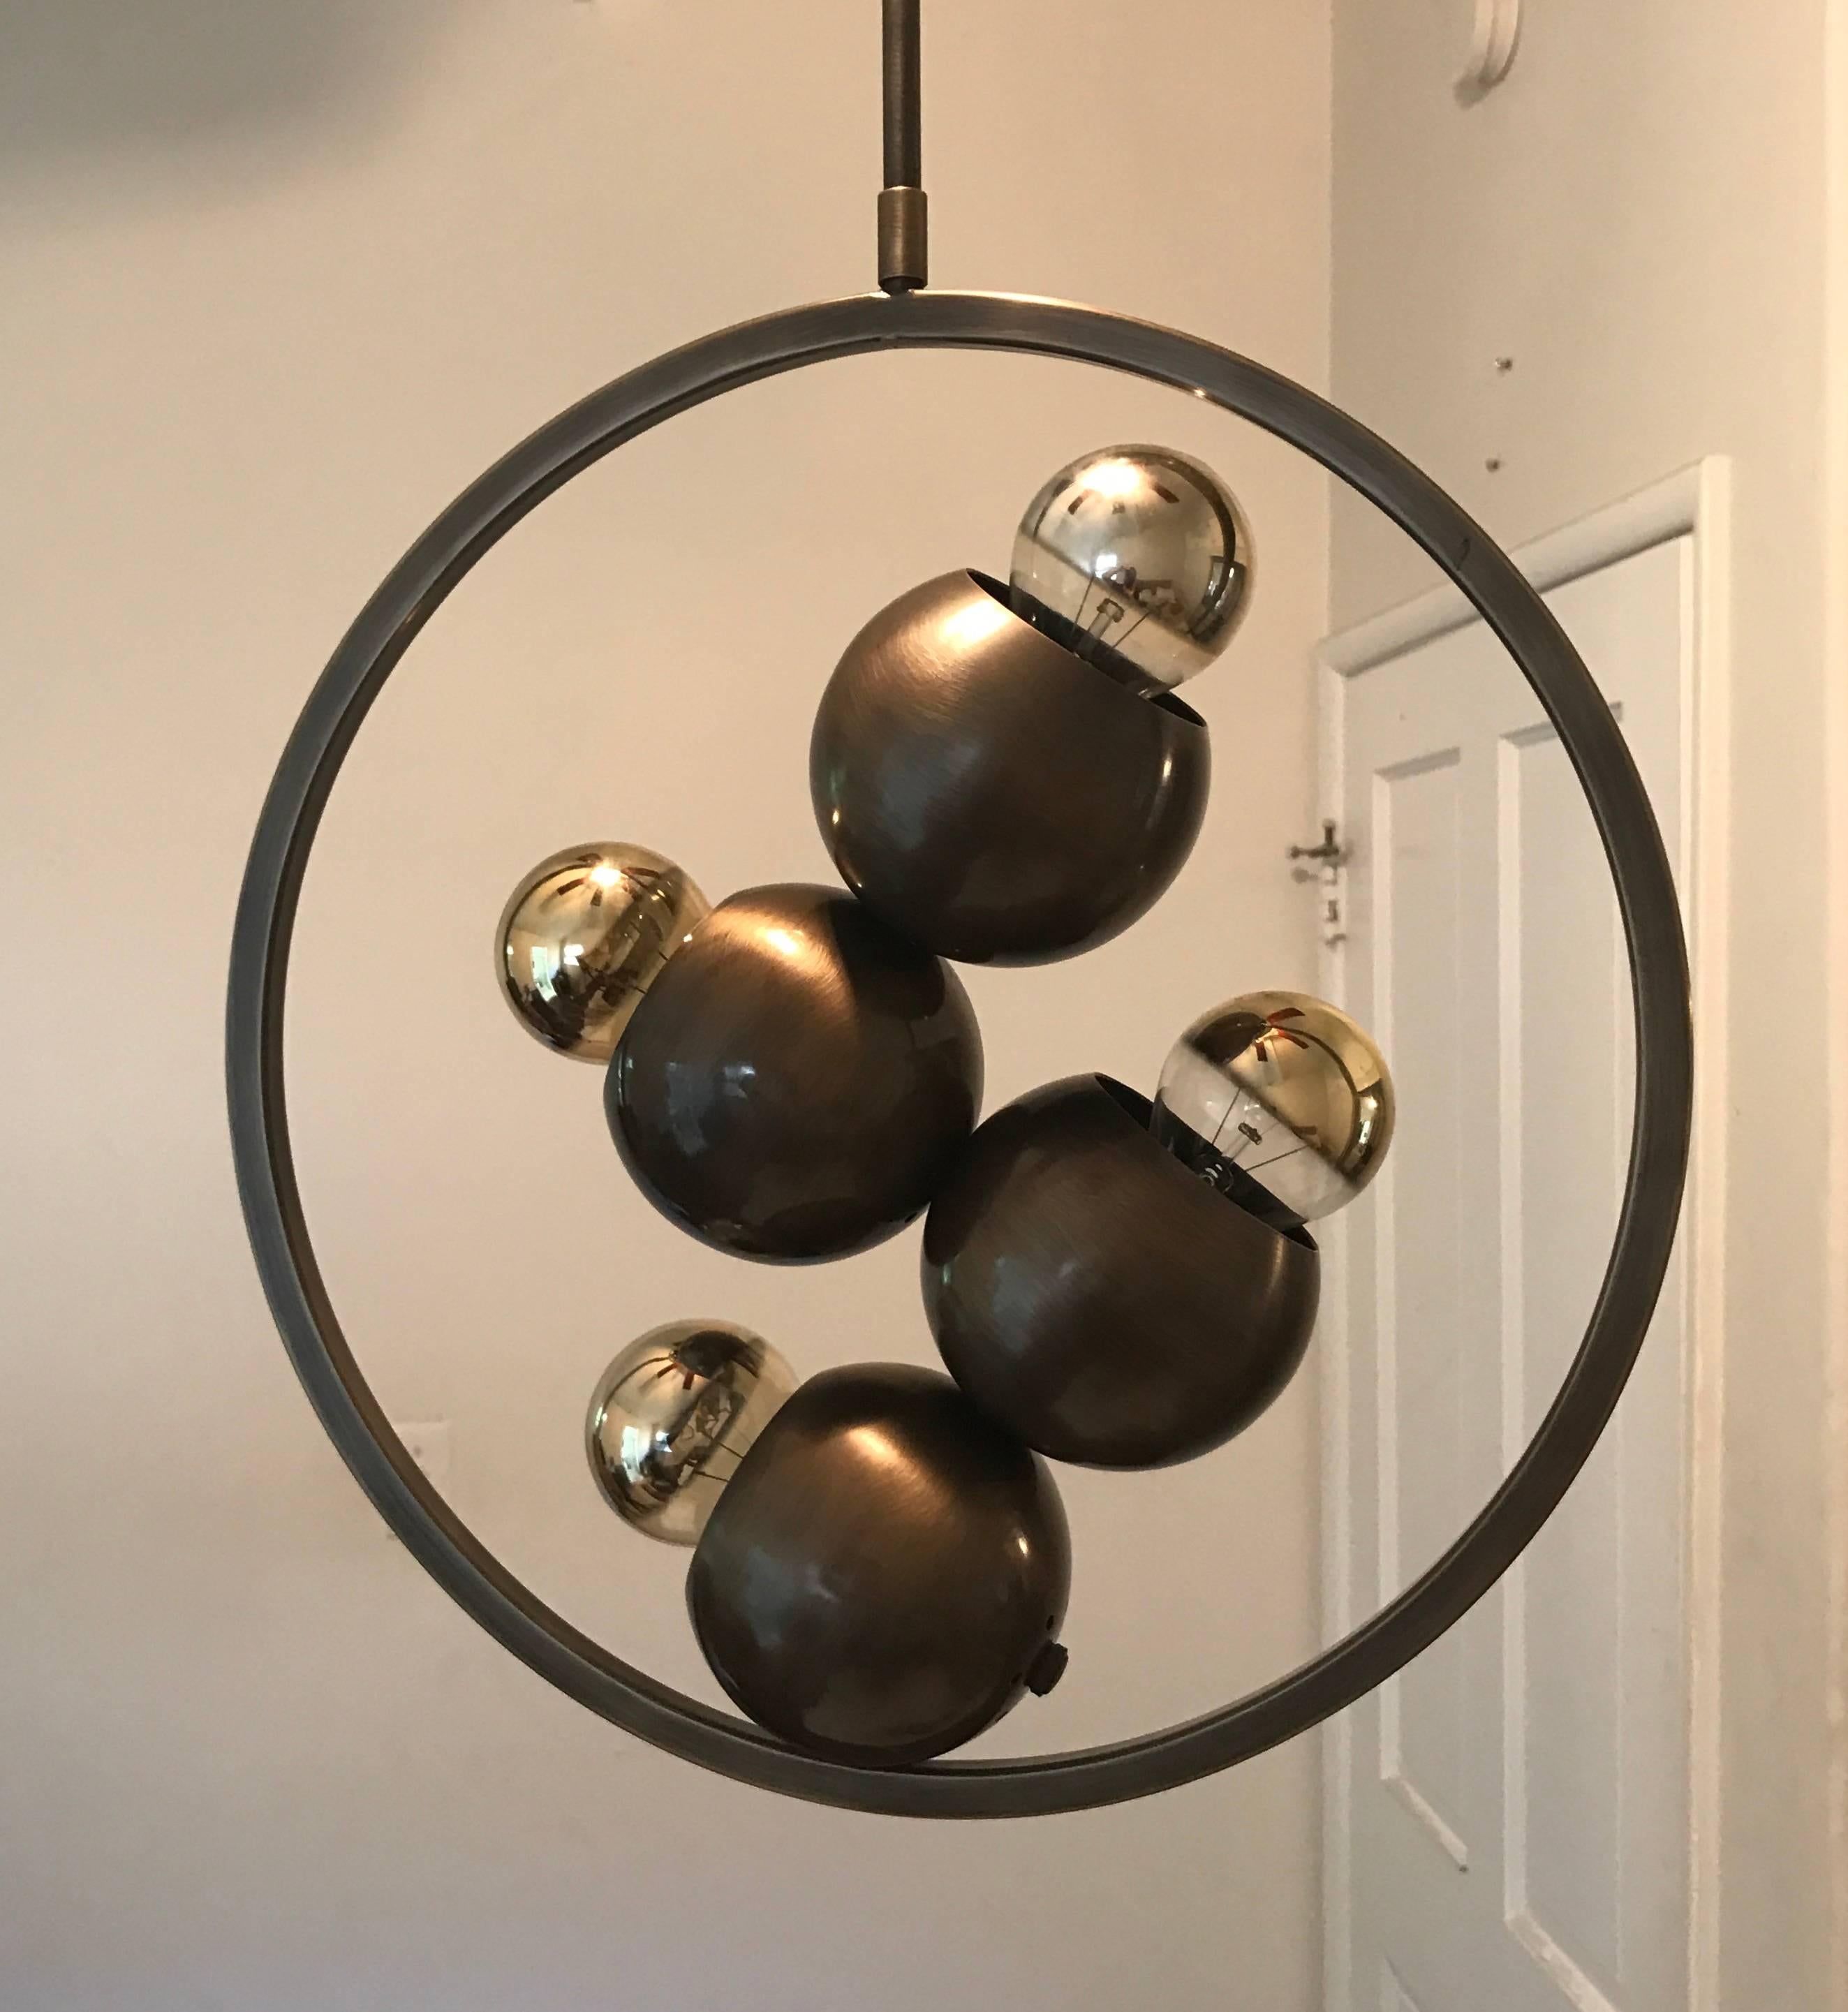 A set of 1960s Italian aged brass pendant with four lights in a Space Age Molecule style. One pendant with lights facing up and the other with lights facing down. A rare modern form with a traditional metal finish. Newly Rewired with four standard